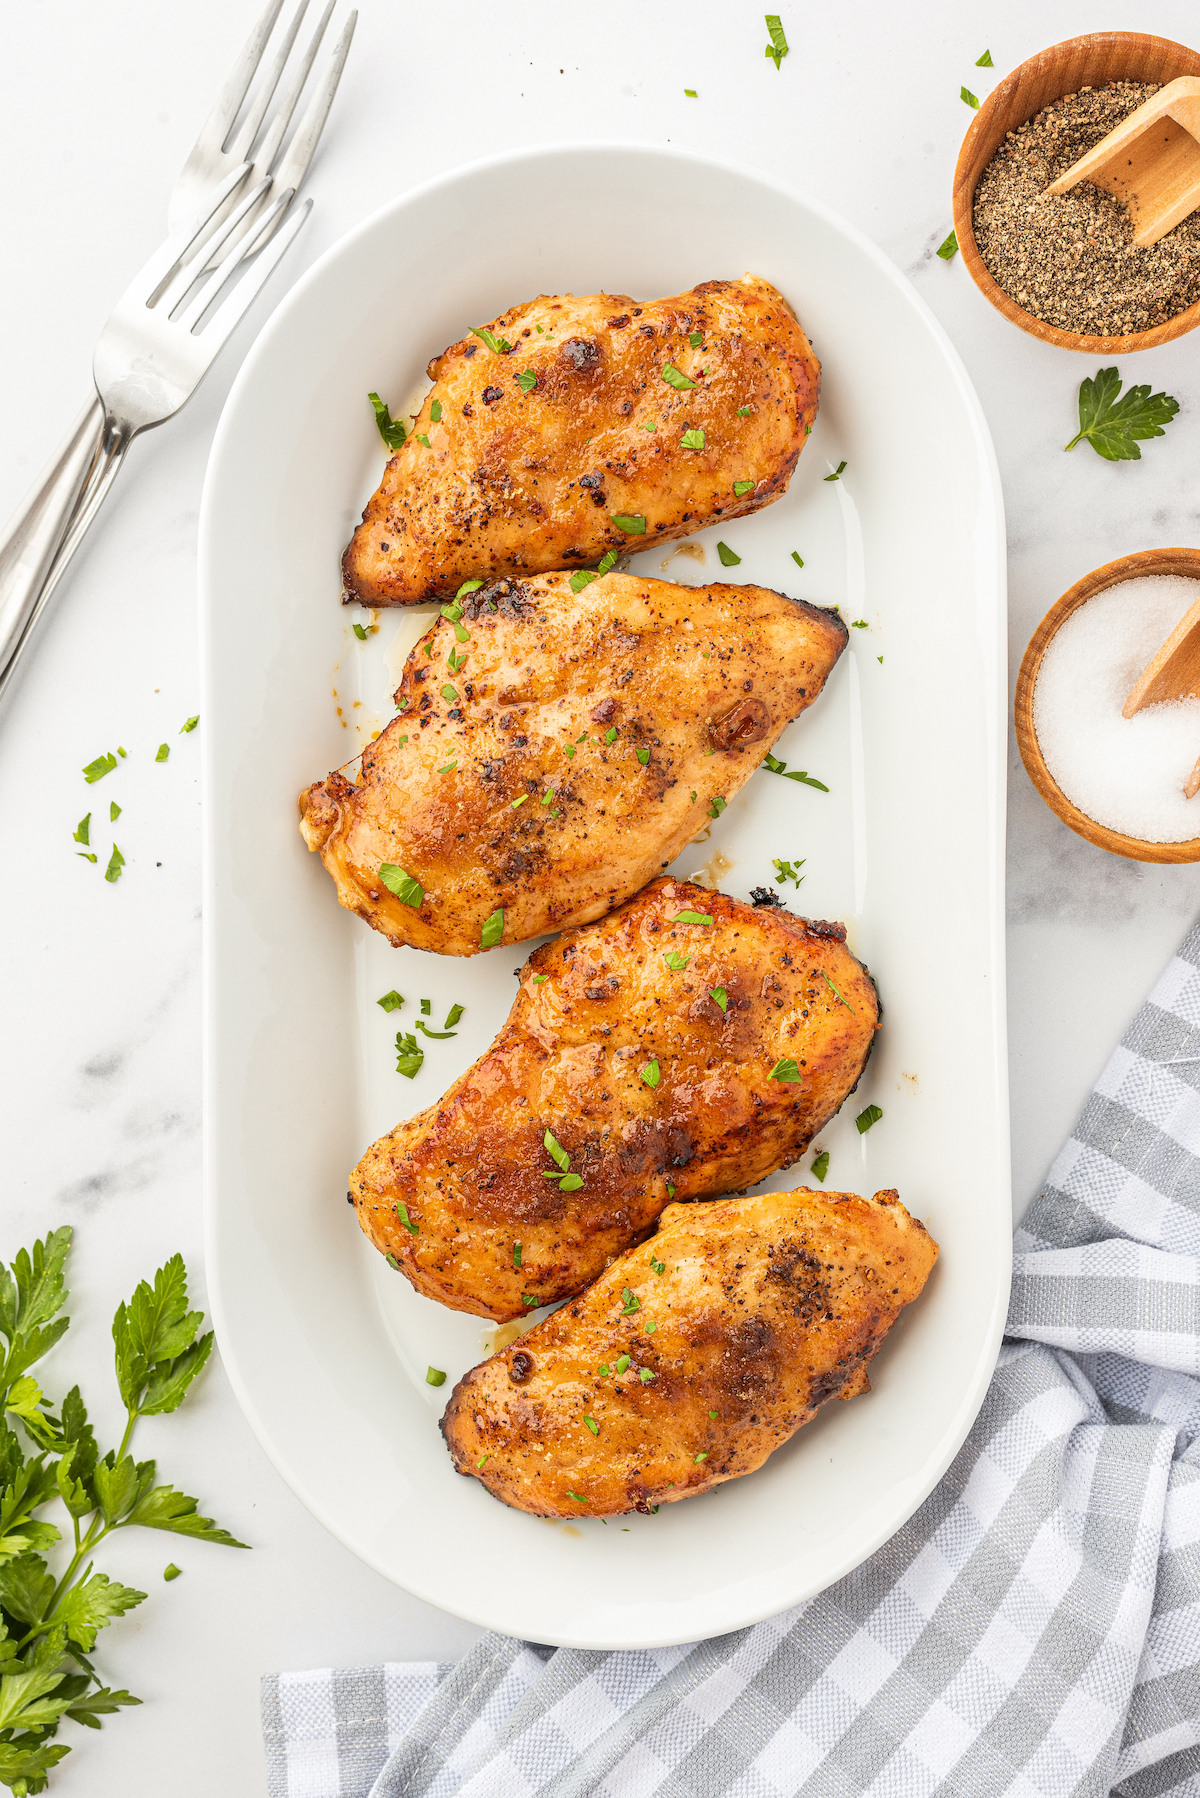 Four juicy brown sugar chicken breasts on a serving platter topped with fresh herbs.